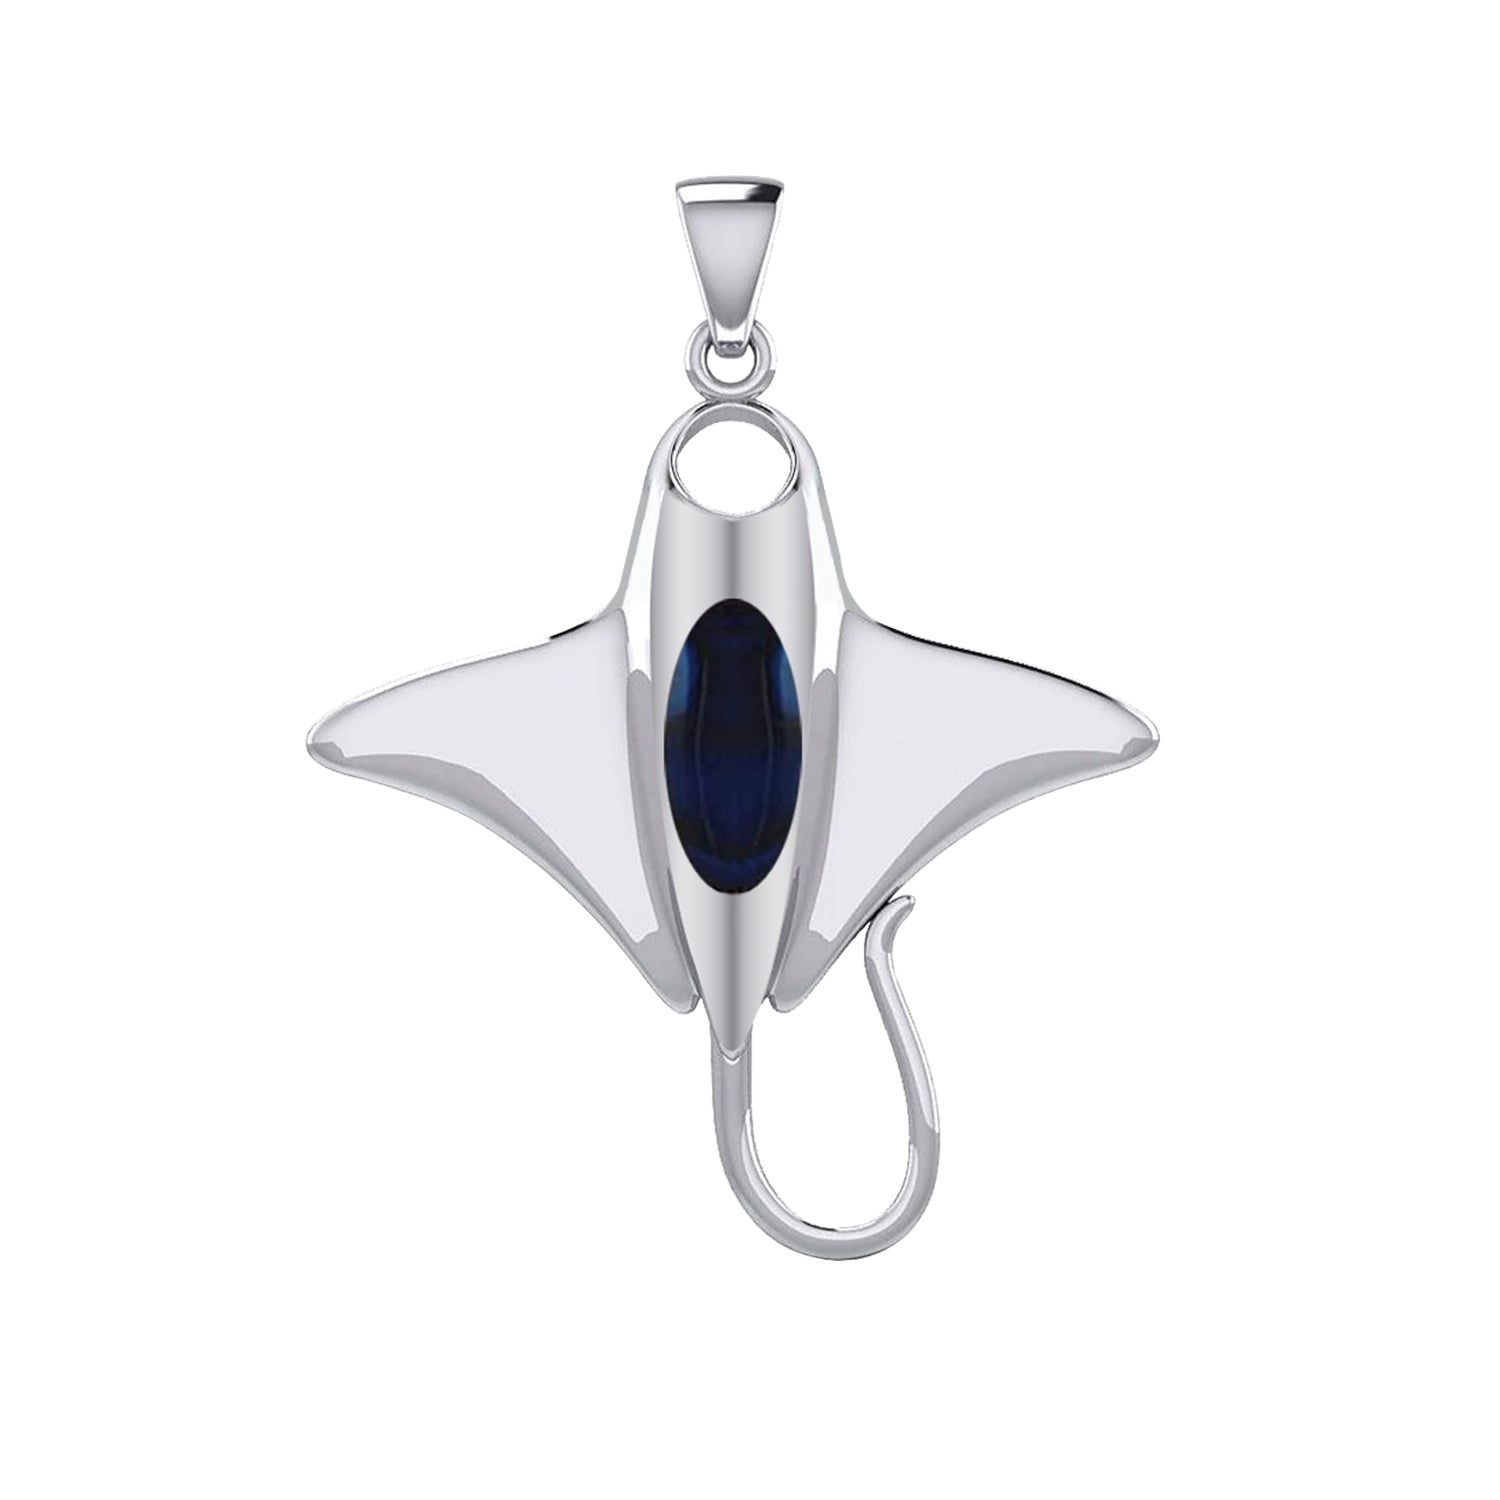 Men's 925 Sterling Silver 30.5mm 3D Manta or Sting Ray Aquatic Pendant Necklace - US Jewels